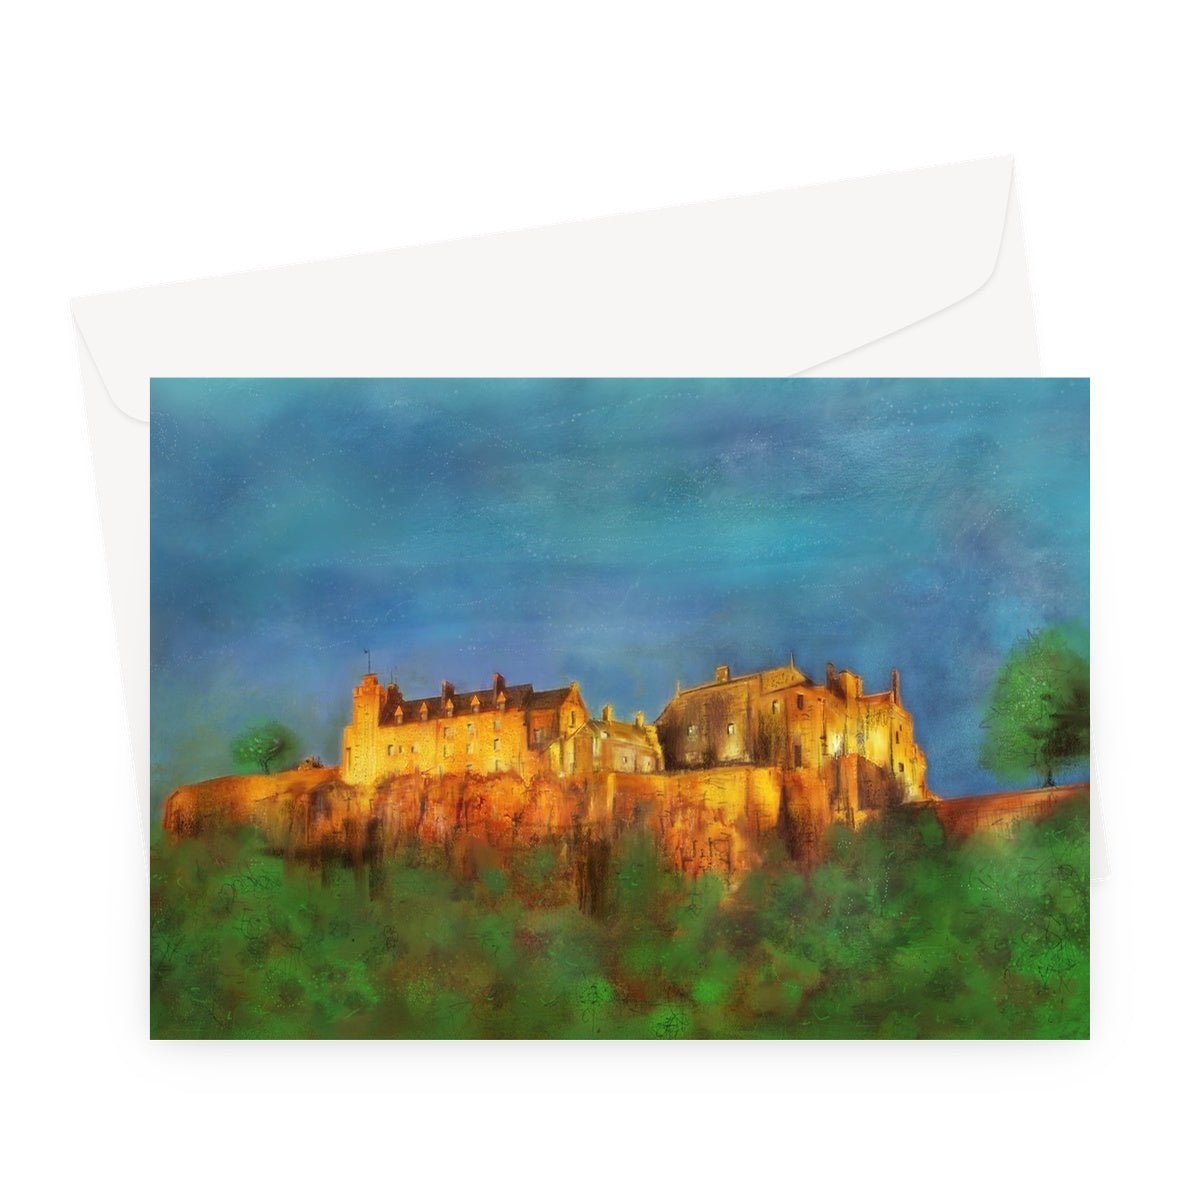 Stirling Castle Art Gifts Greeting Card-Greetings Cards-Historic & Iconic Scotland Art Gallery-A5 Landscape-1 Card-Paintings, Prints, Homeware, Art Gifts From Scotland By Scottish Artist Kevin Hunter